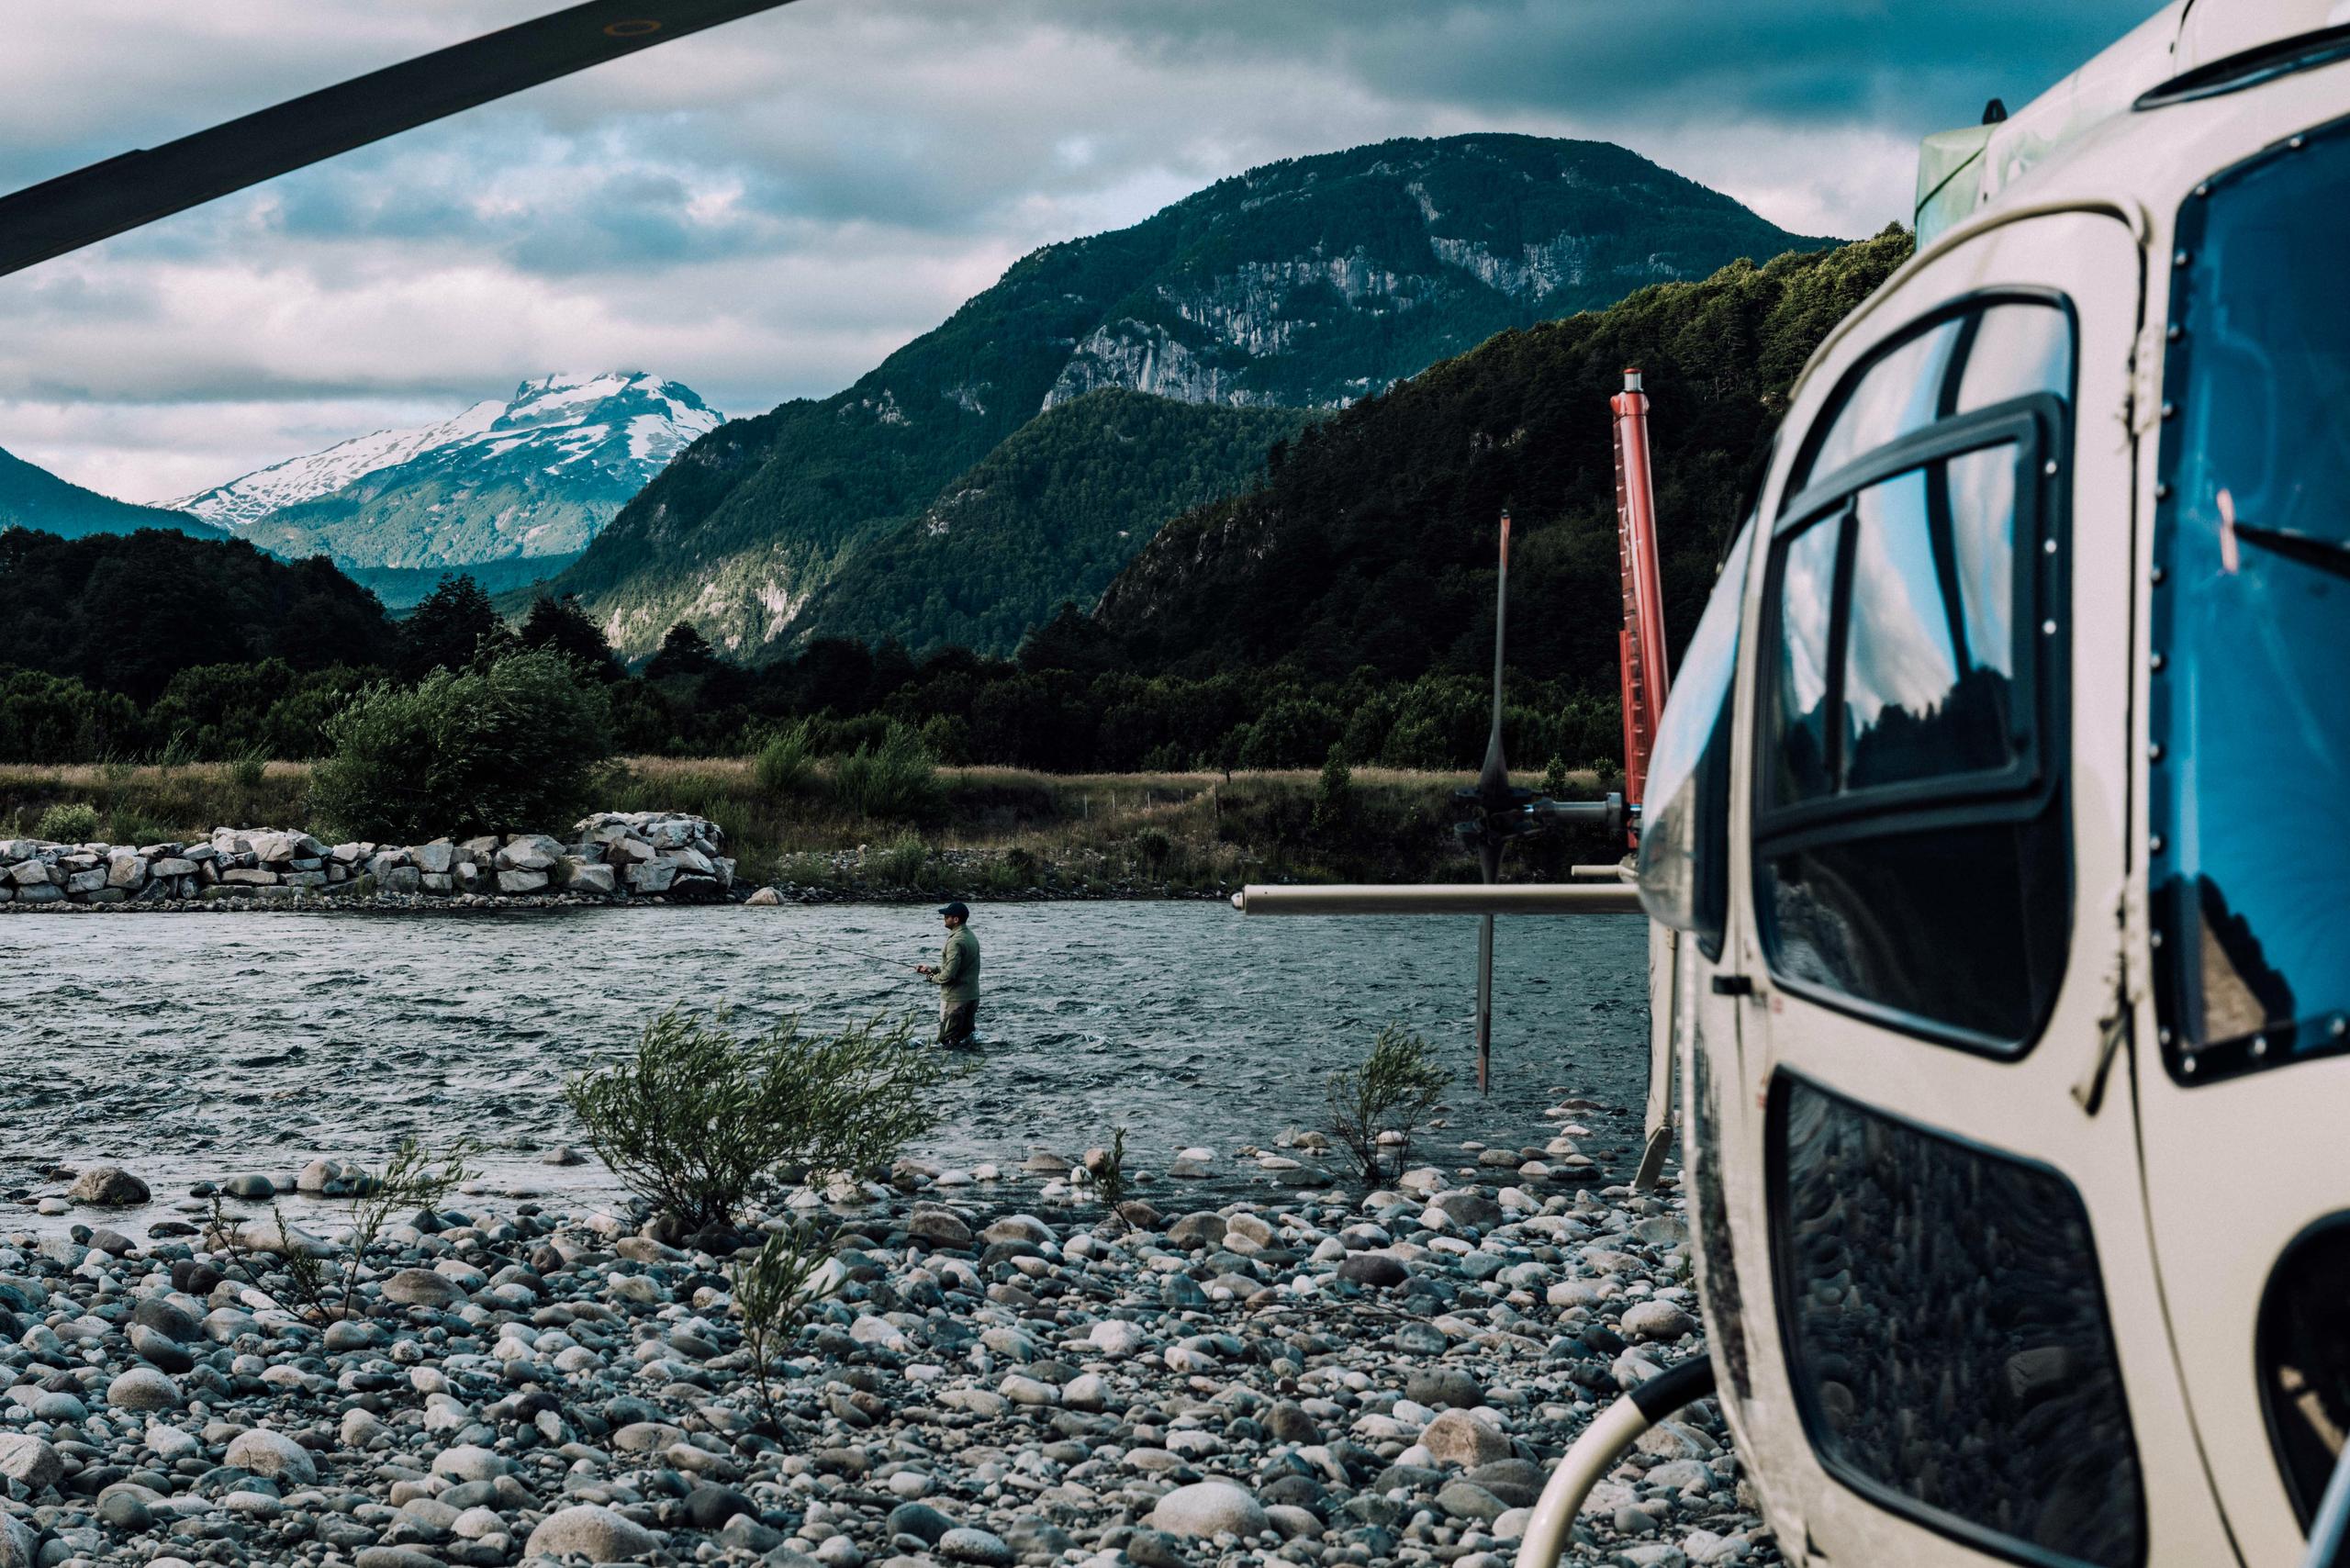 Man in river fly fishing with helicopter on the shore in the foreground and the mountains in the background